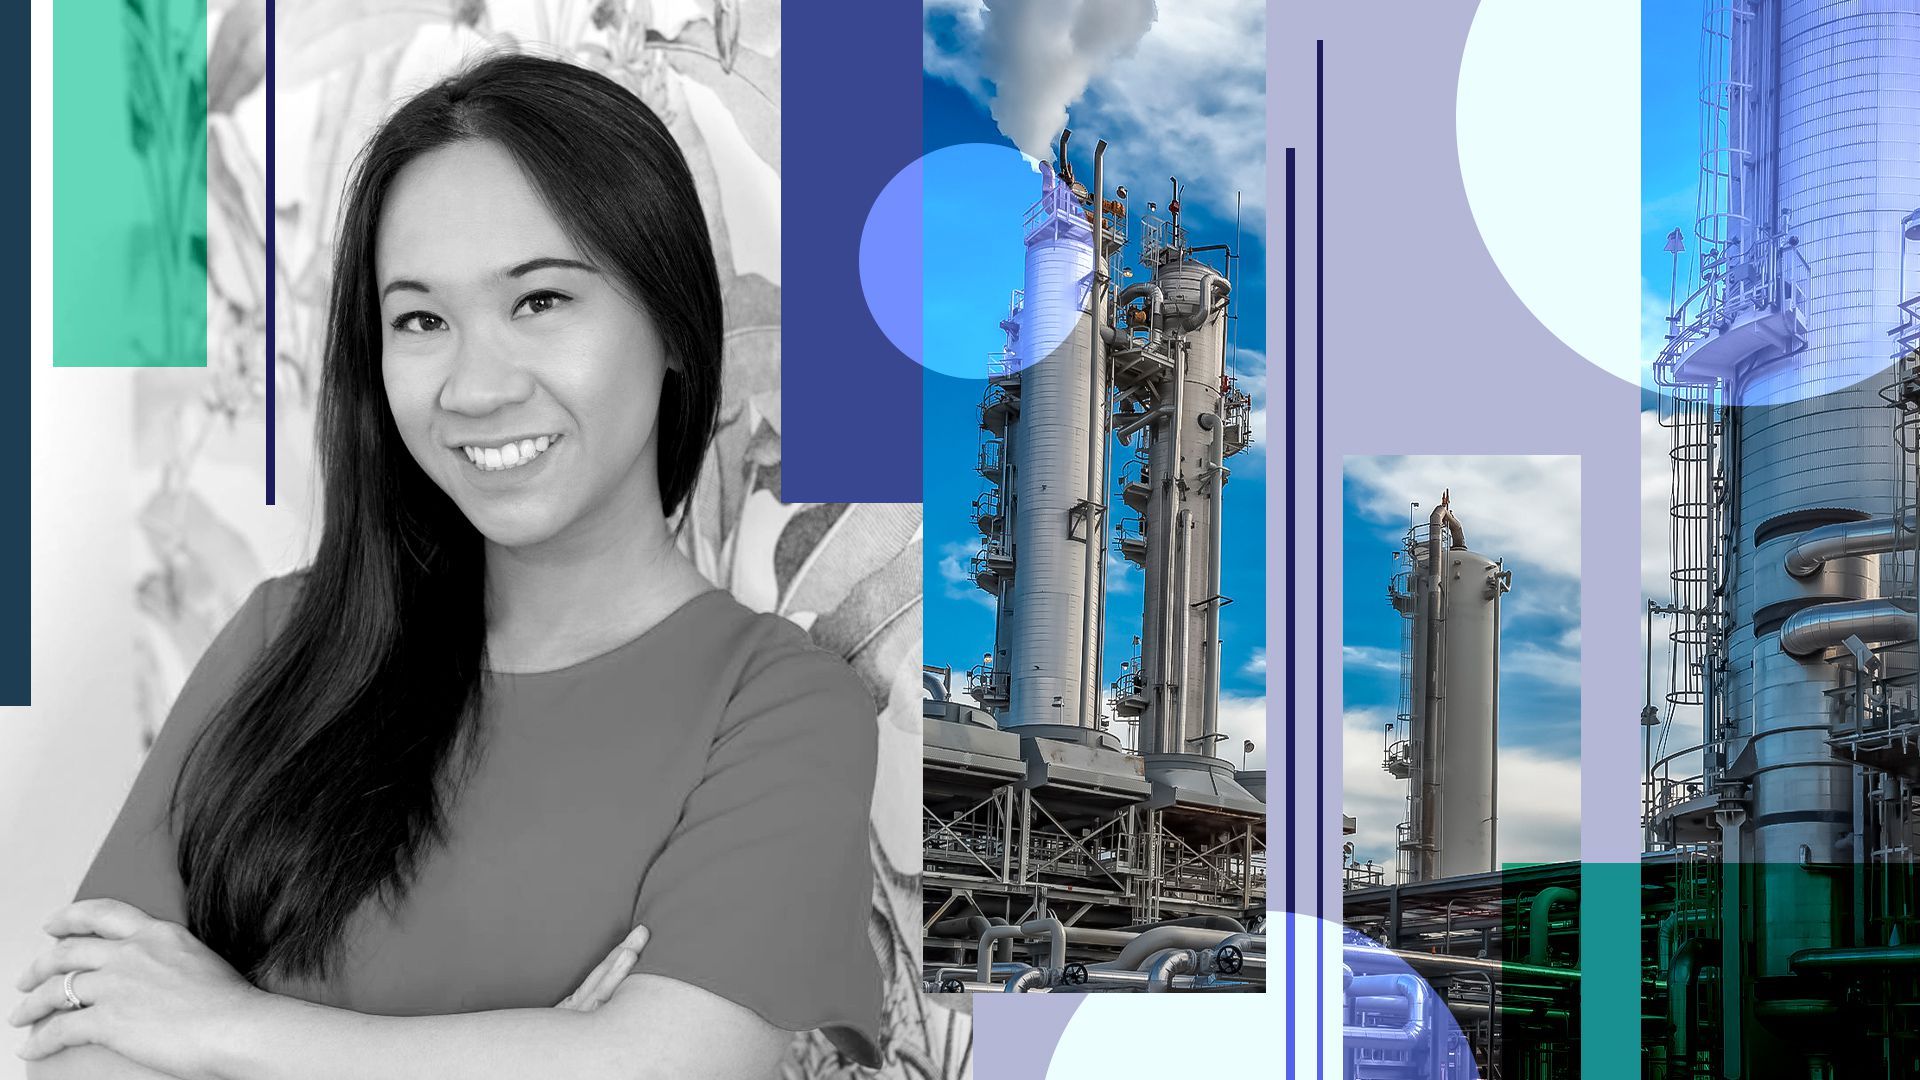 Photo illustration of Janice Tran, CEO of Kanin Energy, with images of a factory and abstract shapes.